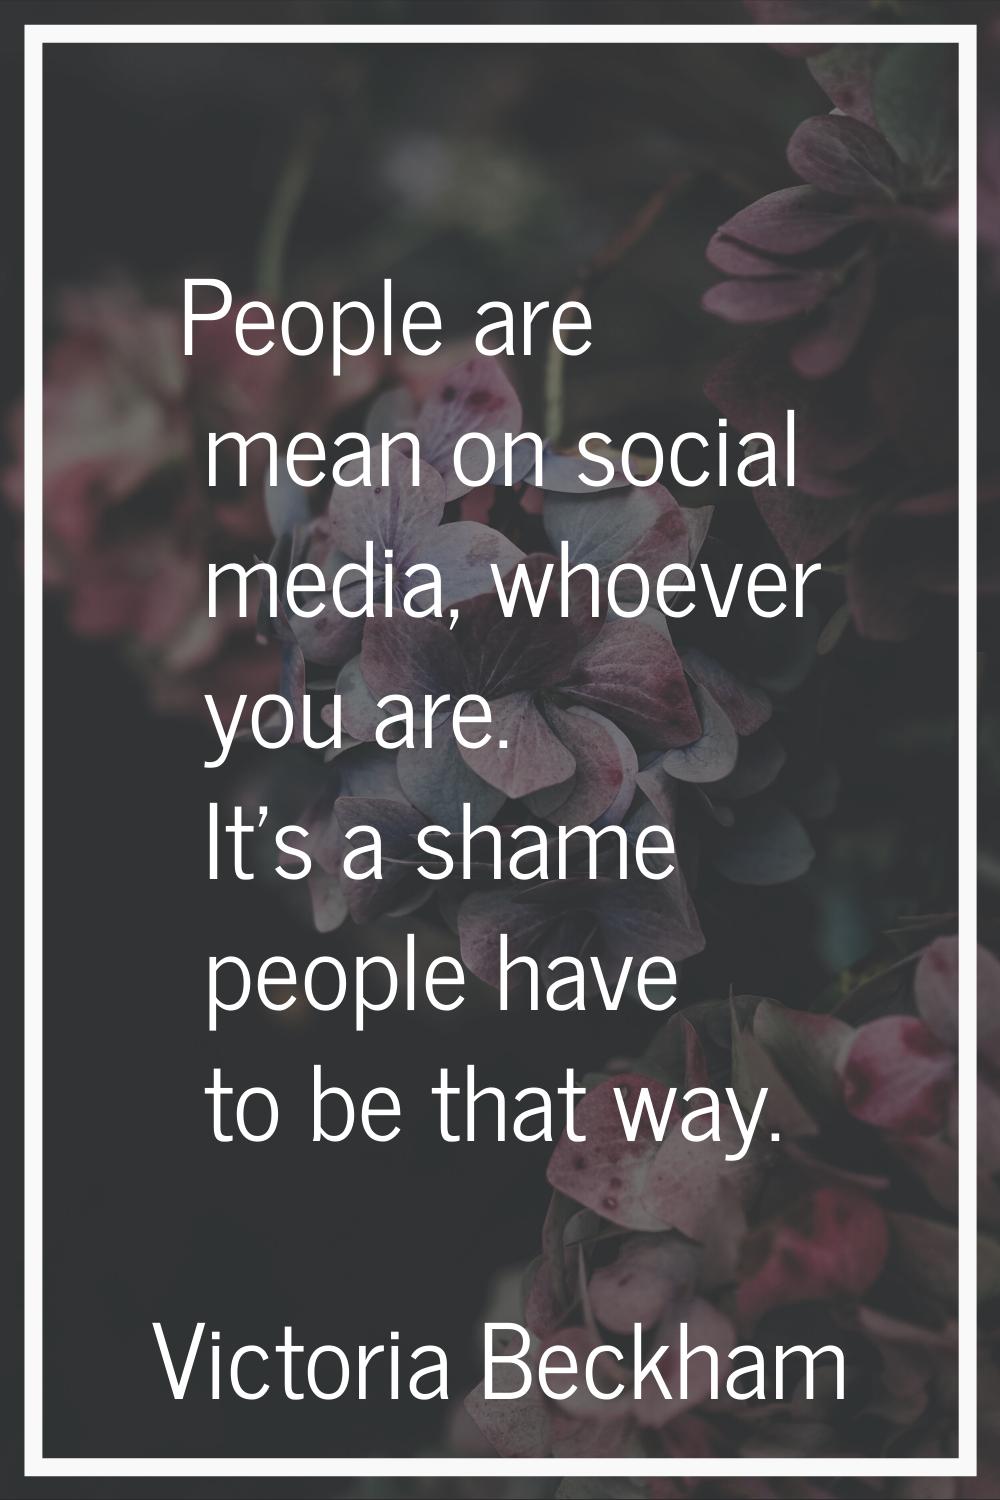 People are mean on social media, whoever you are. It's a shame people have to be that way.